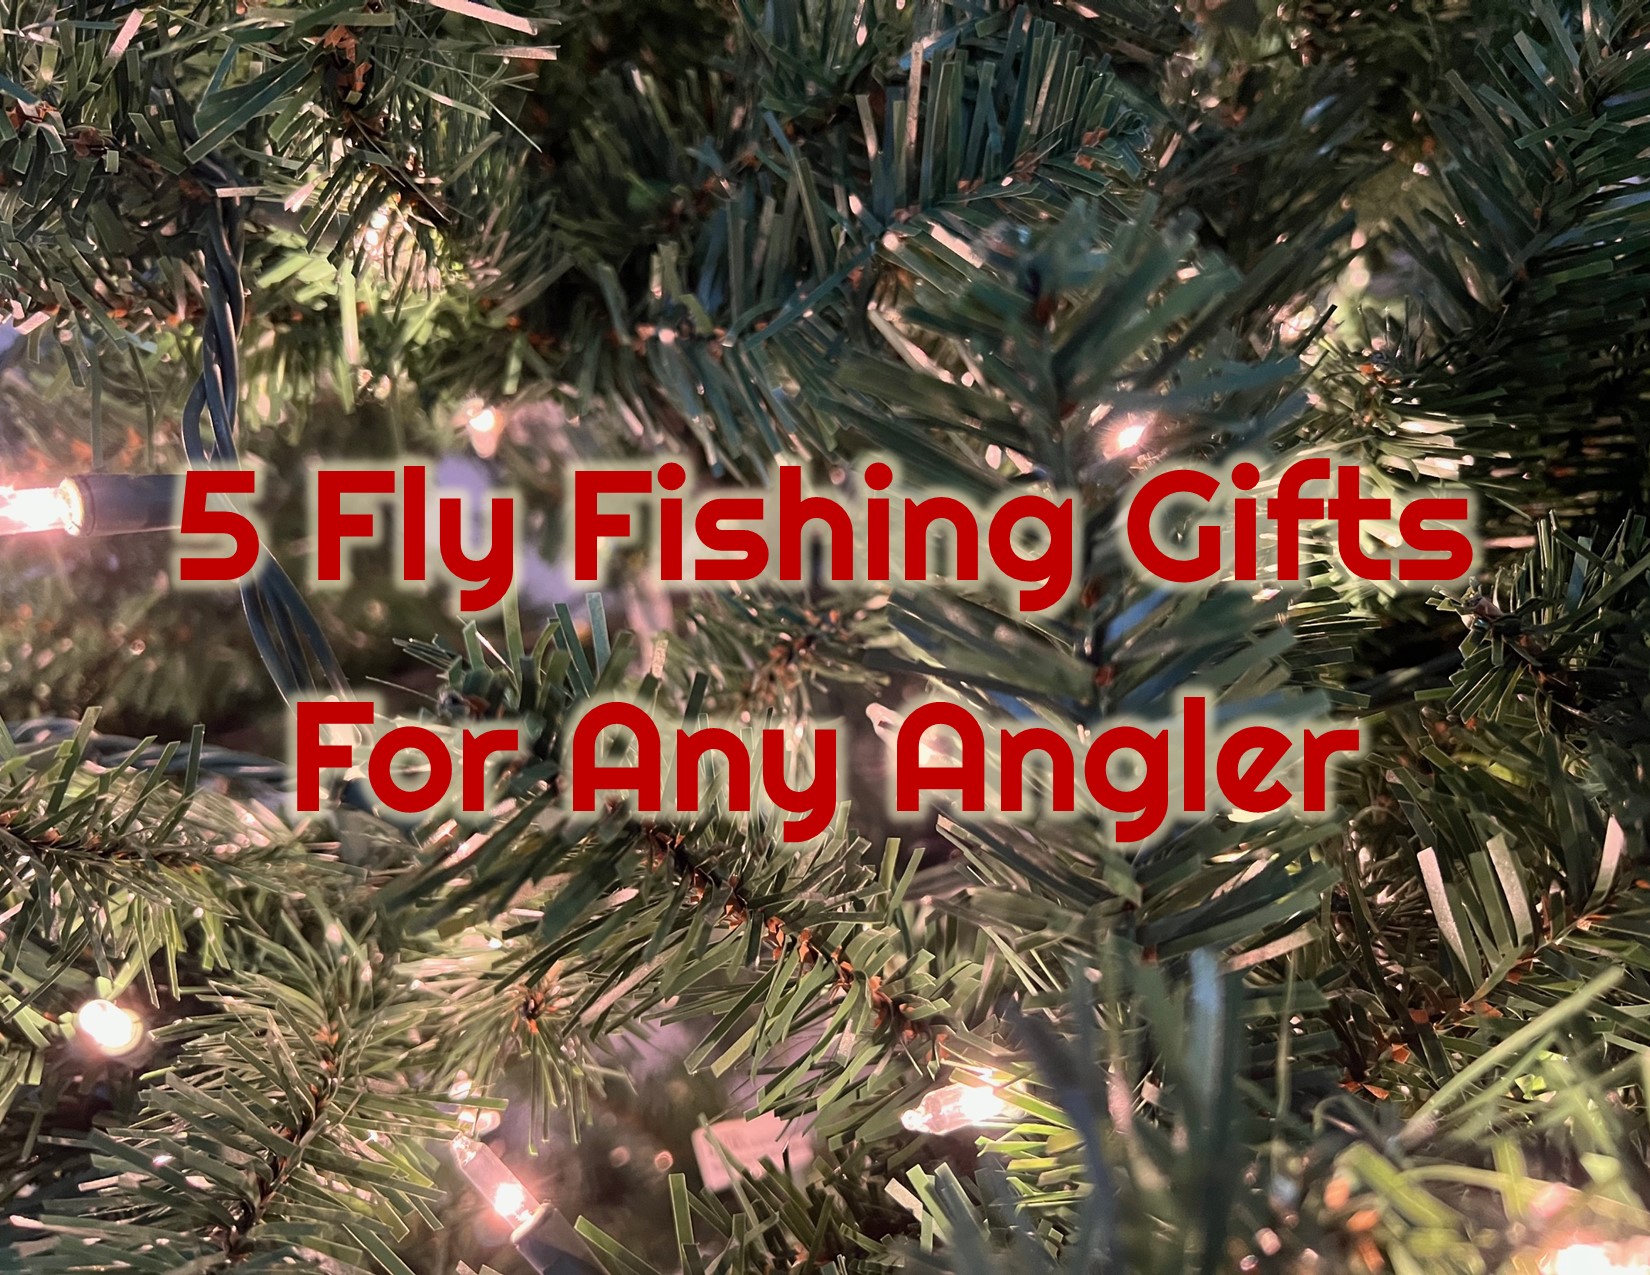 5 Fly Fishing Gifts For Any Angler - Casting Across